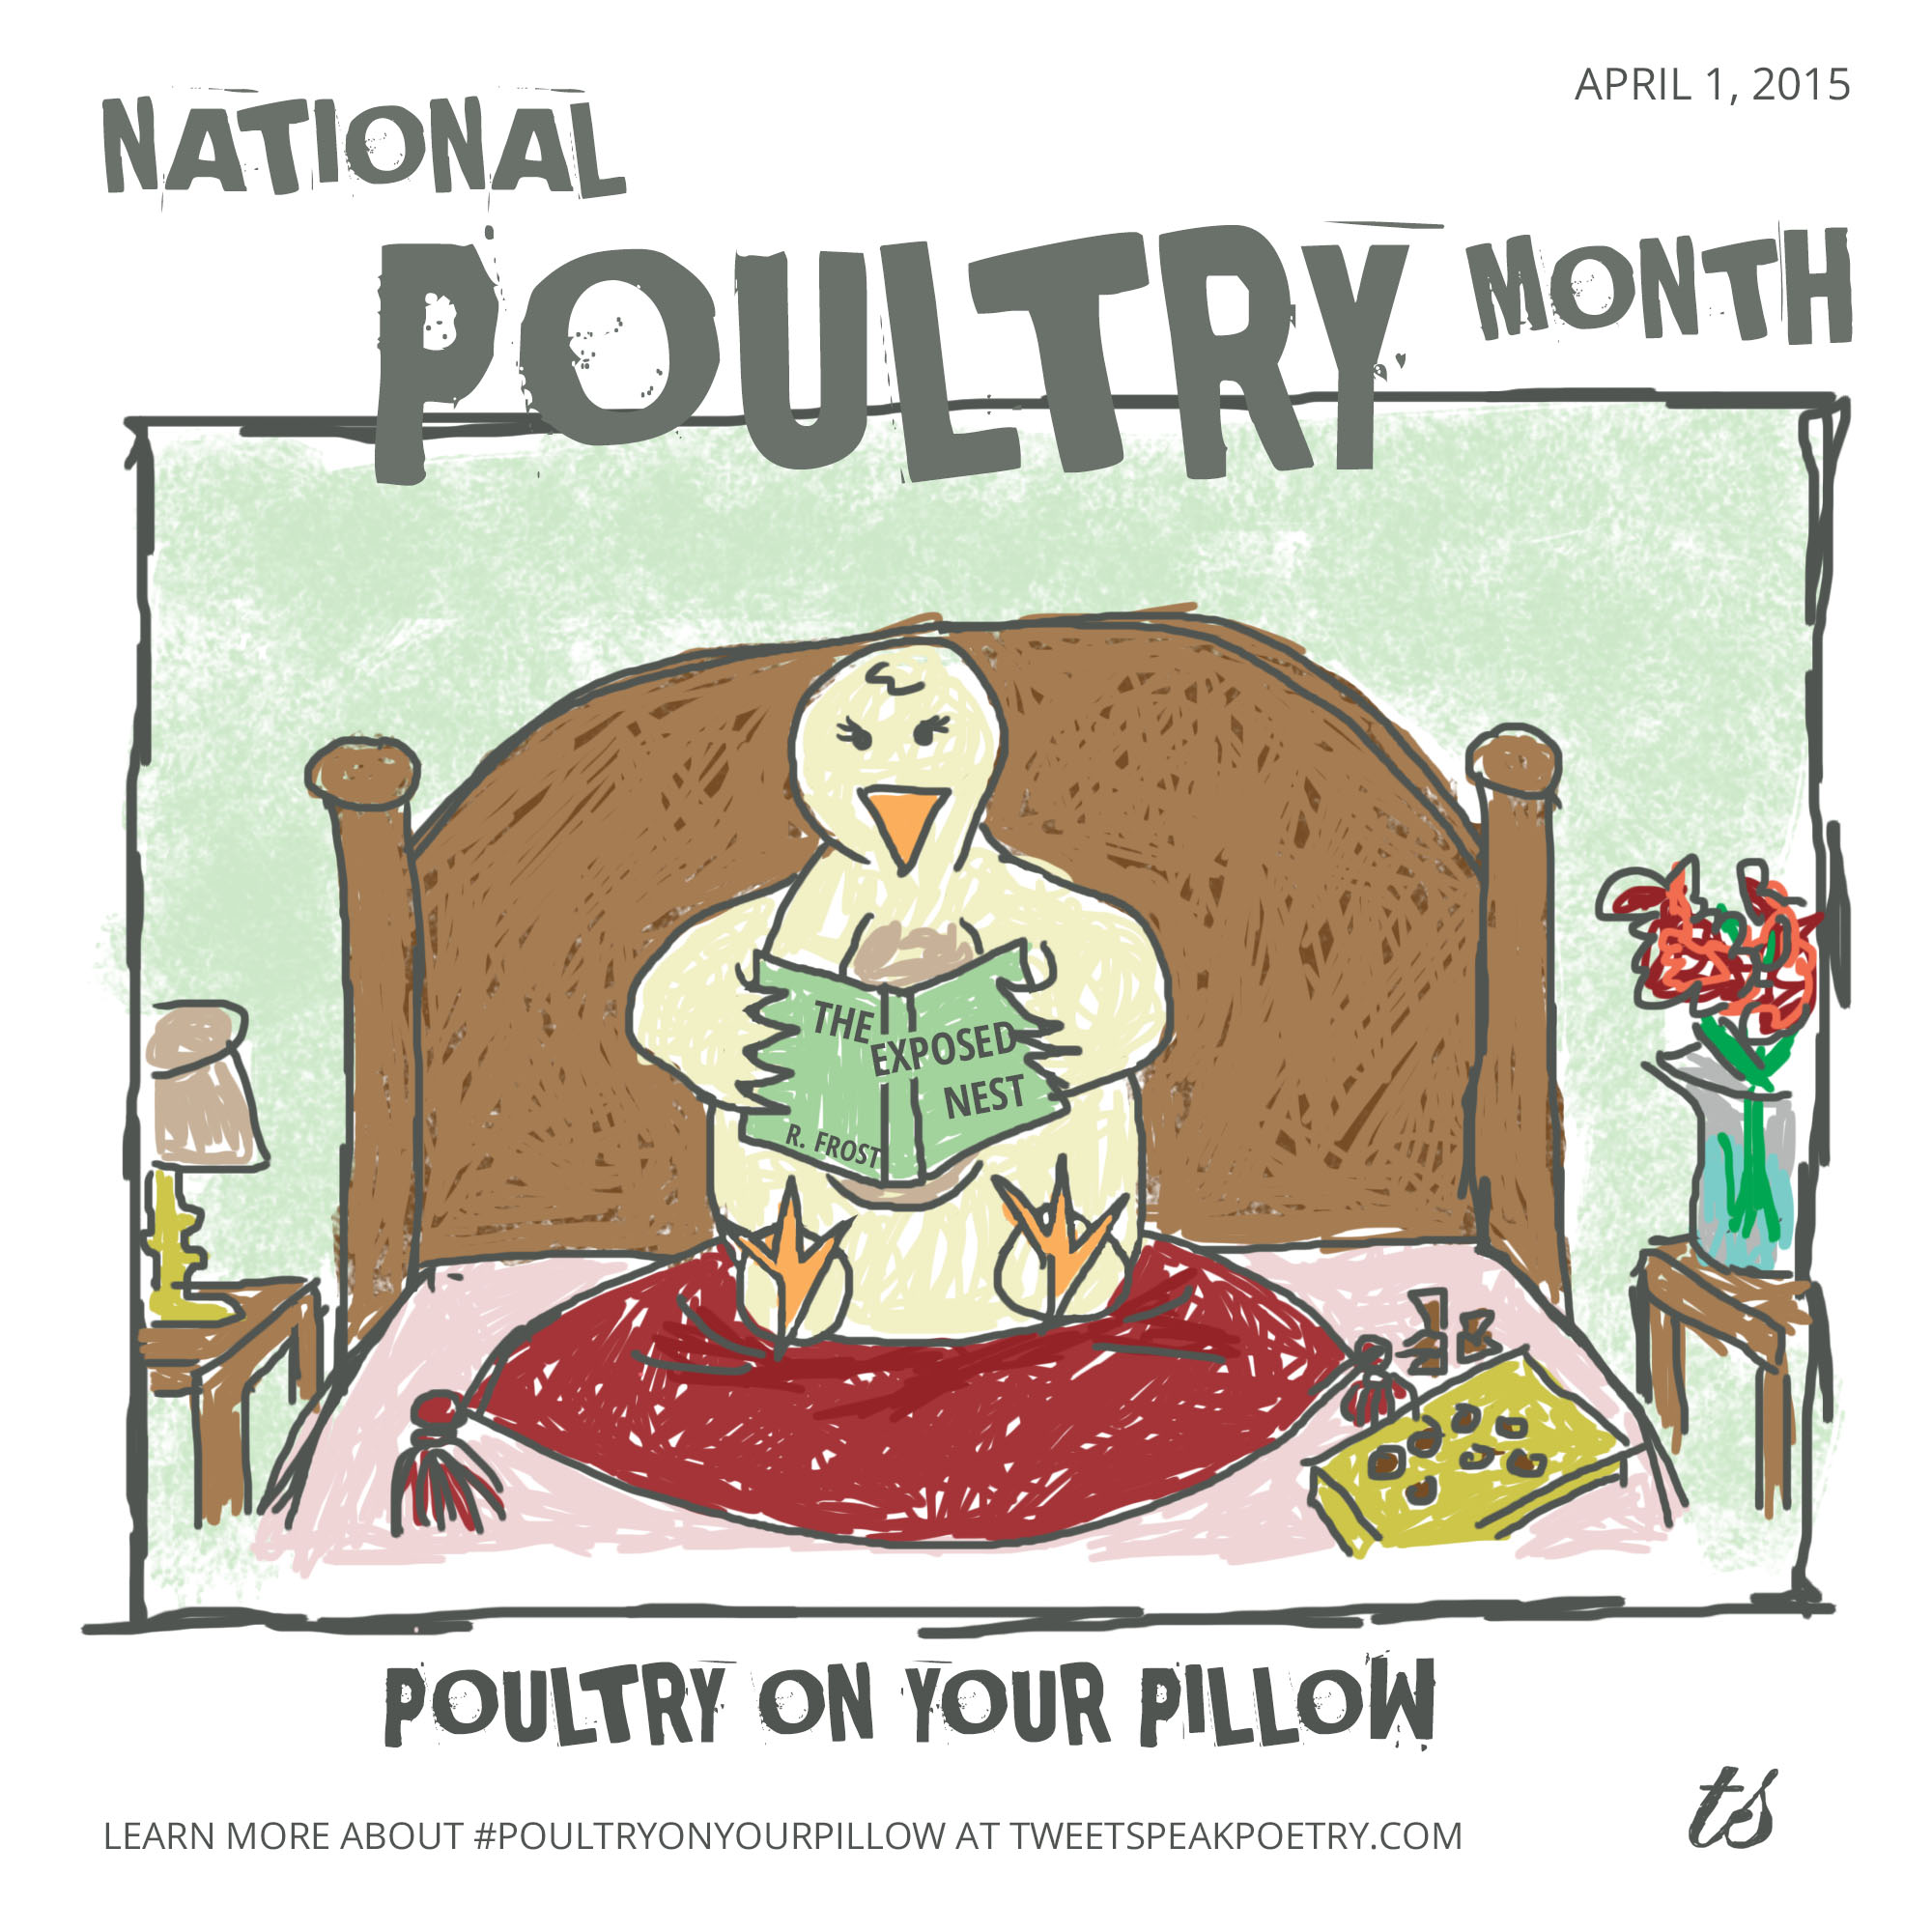 Poultry on Your Pillow Day